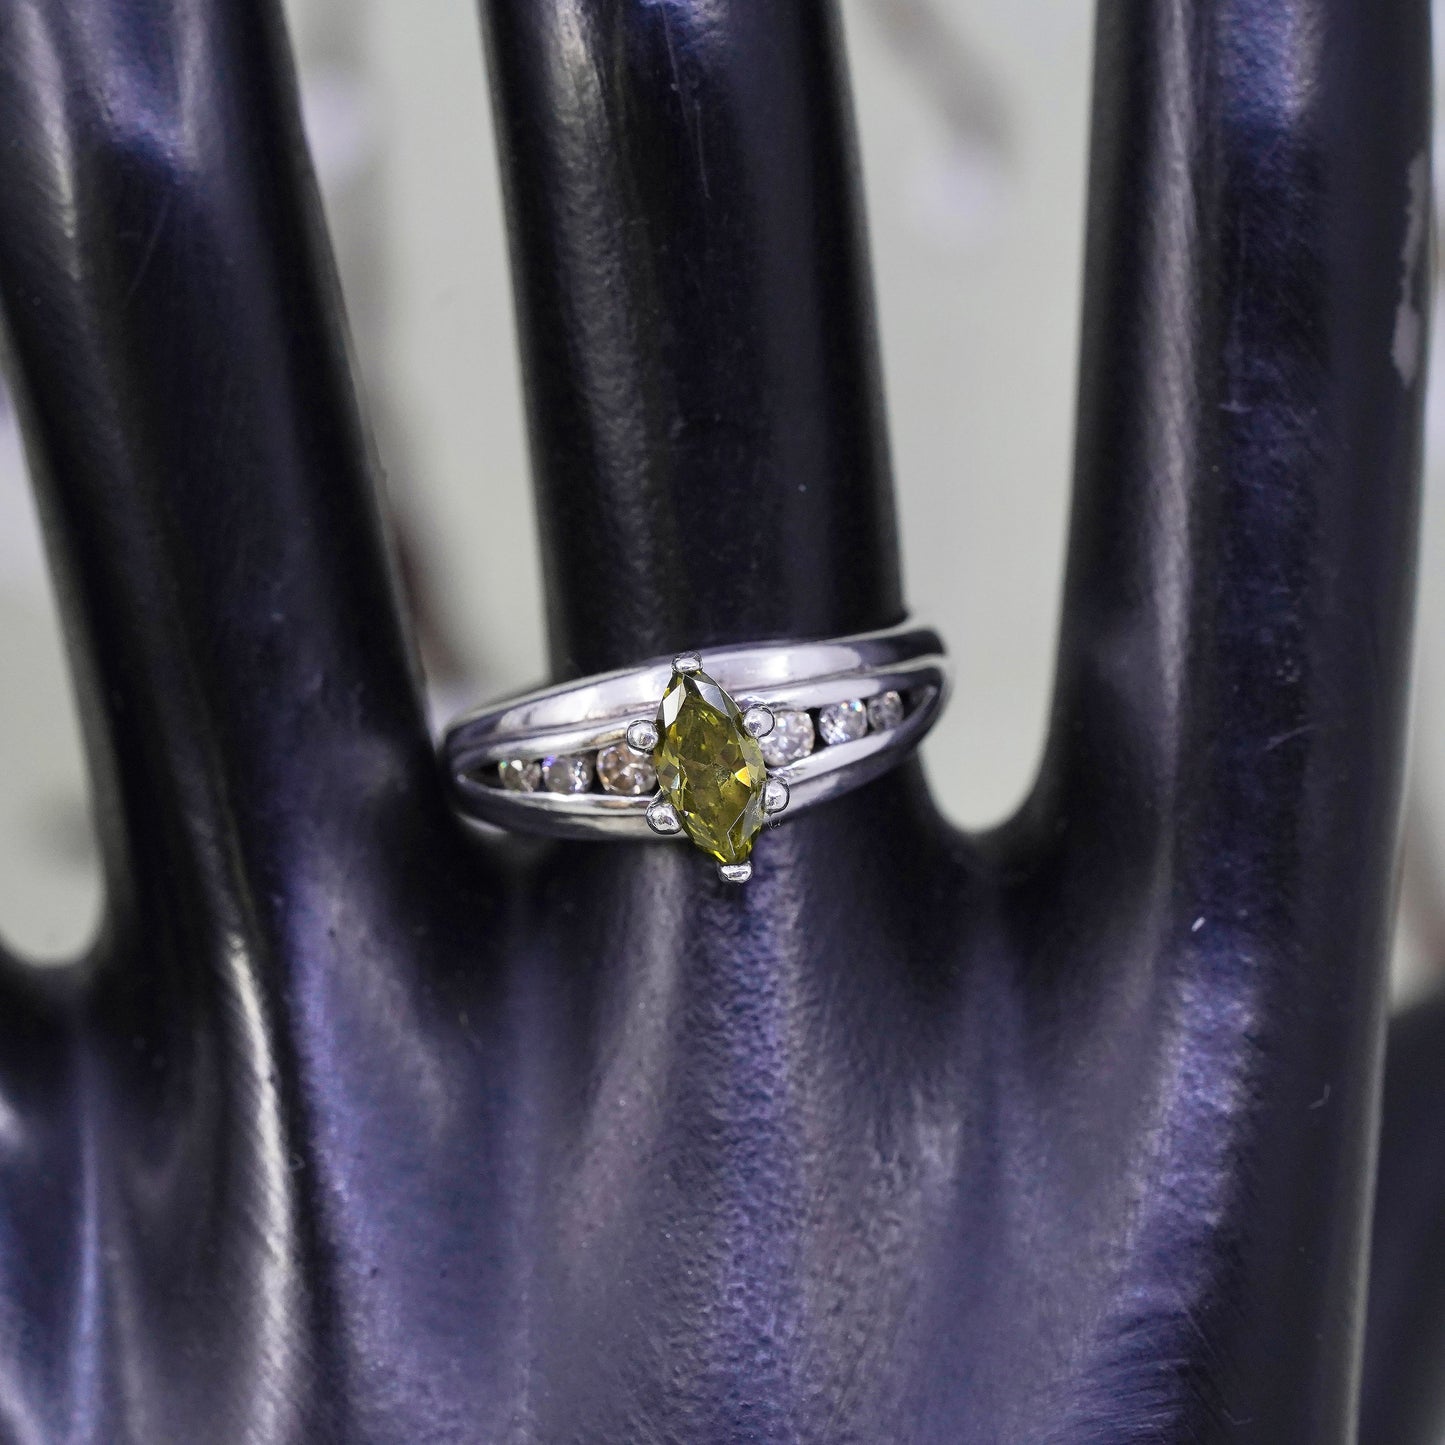 Size 8, Vintage sterling 925 silver handmade ring with peridot and cz